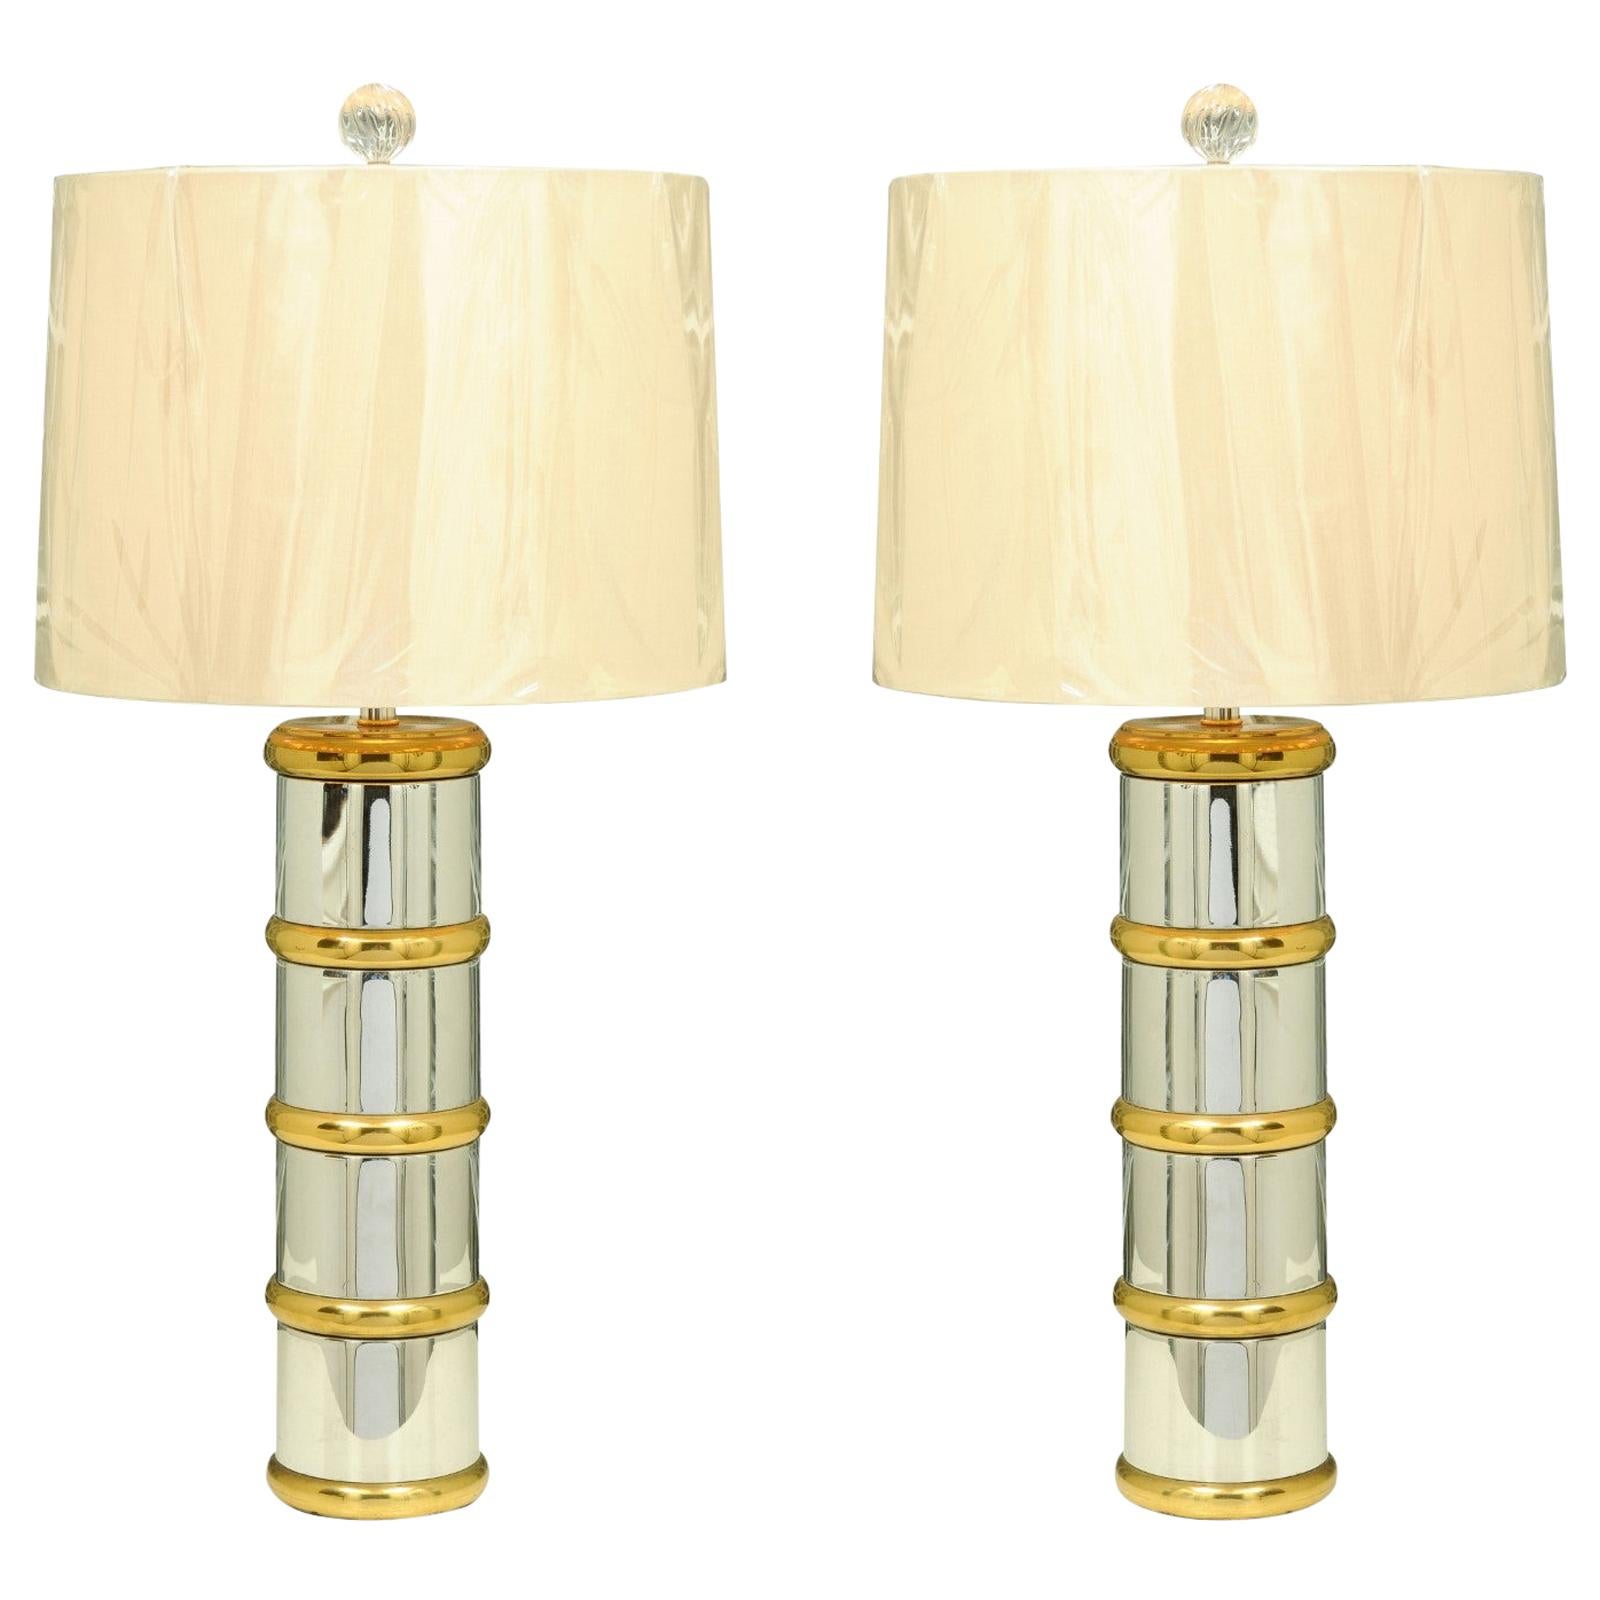 Stunning Pair of Faux-Bamboo Lamps in Chrome and Brass, Italy, circa 1970